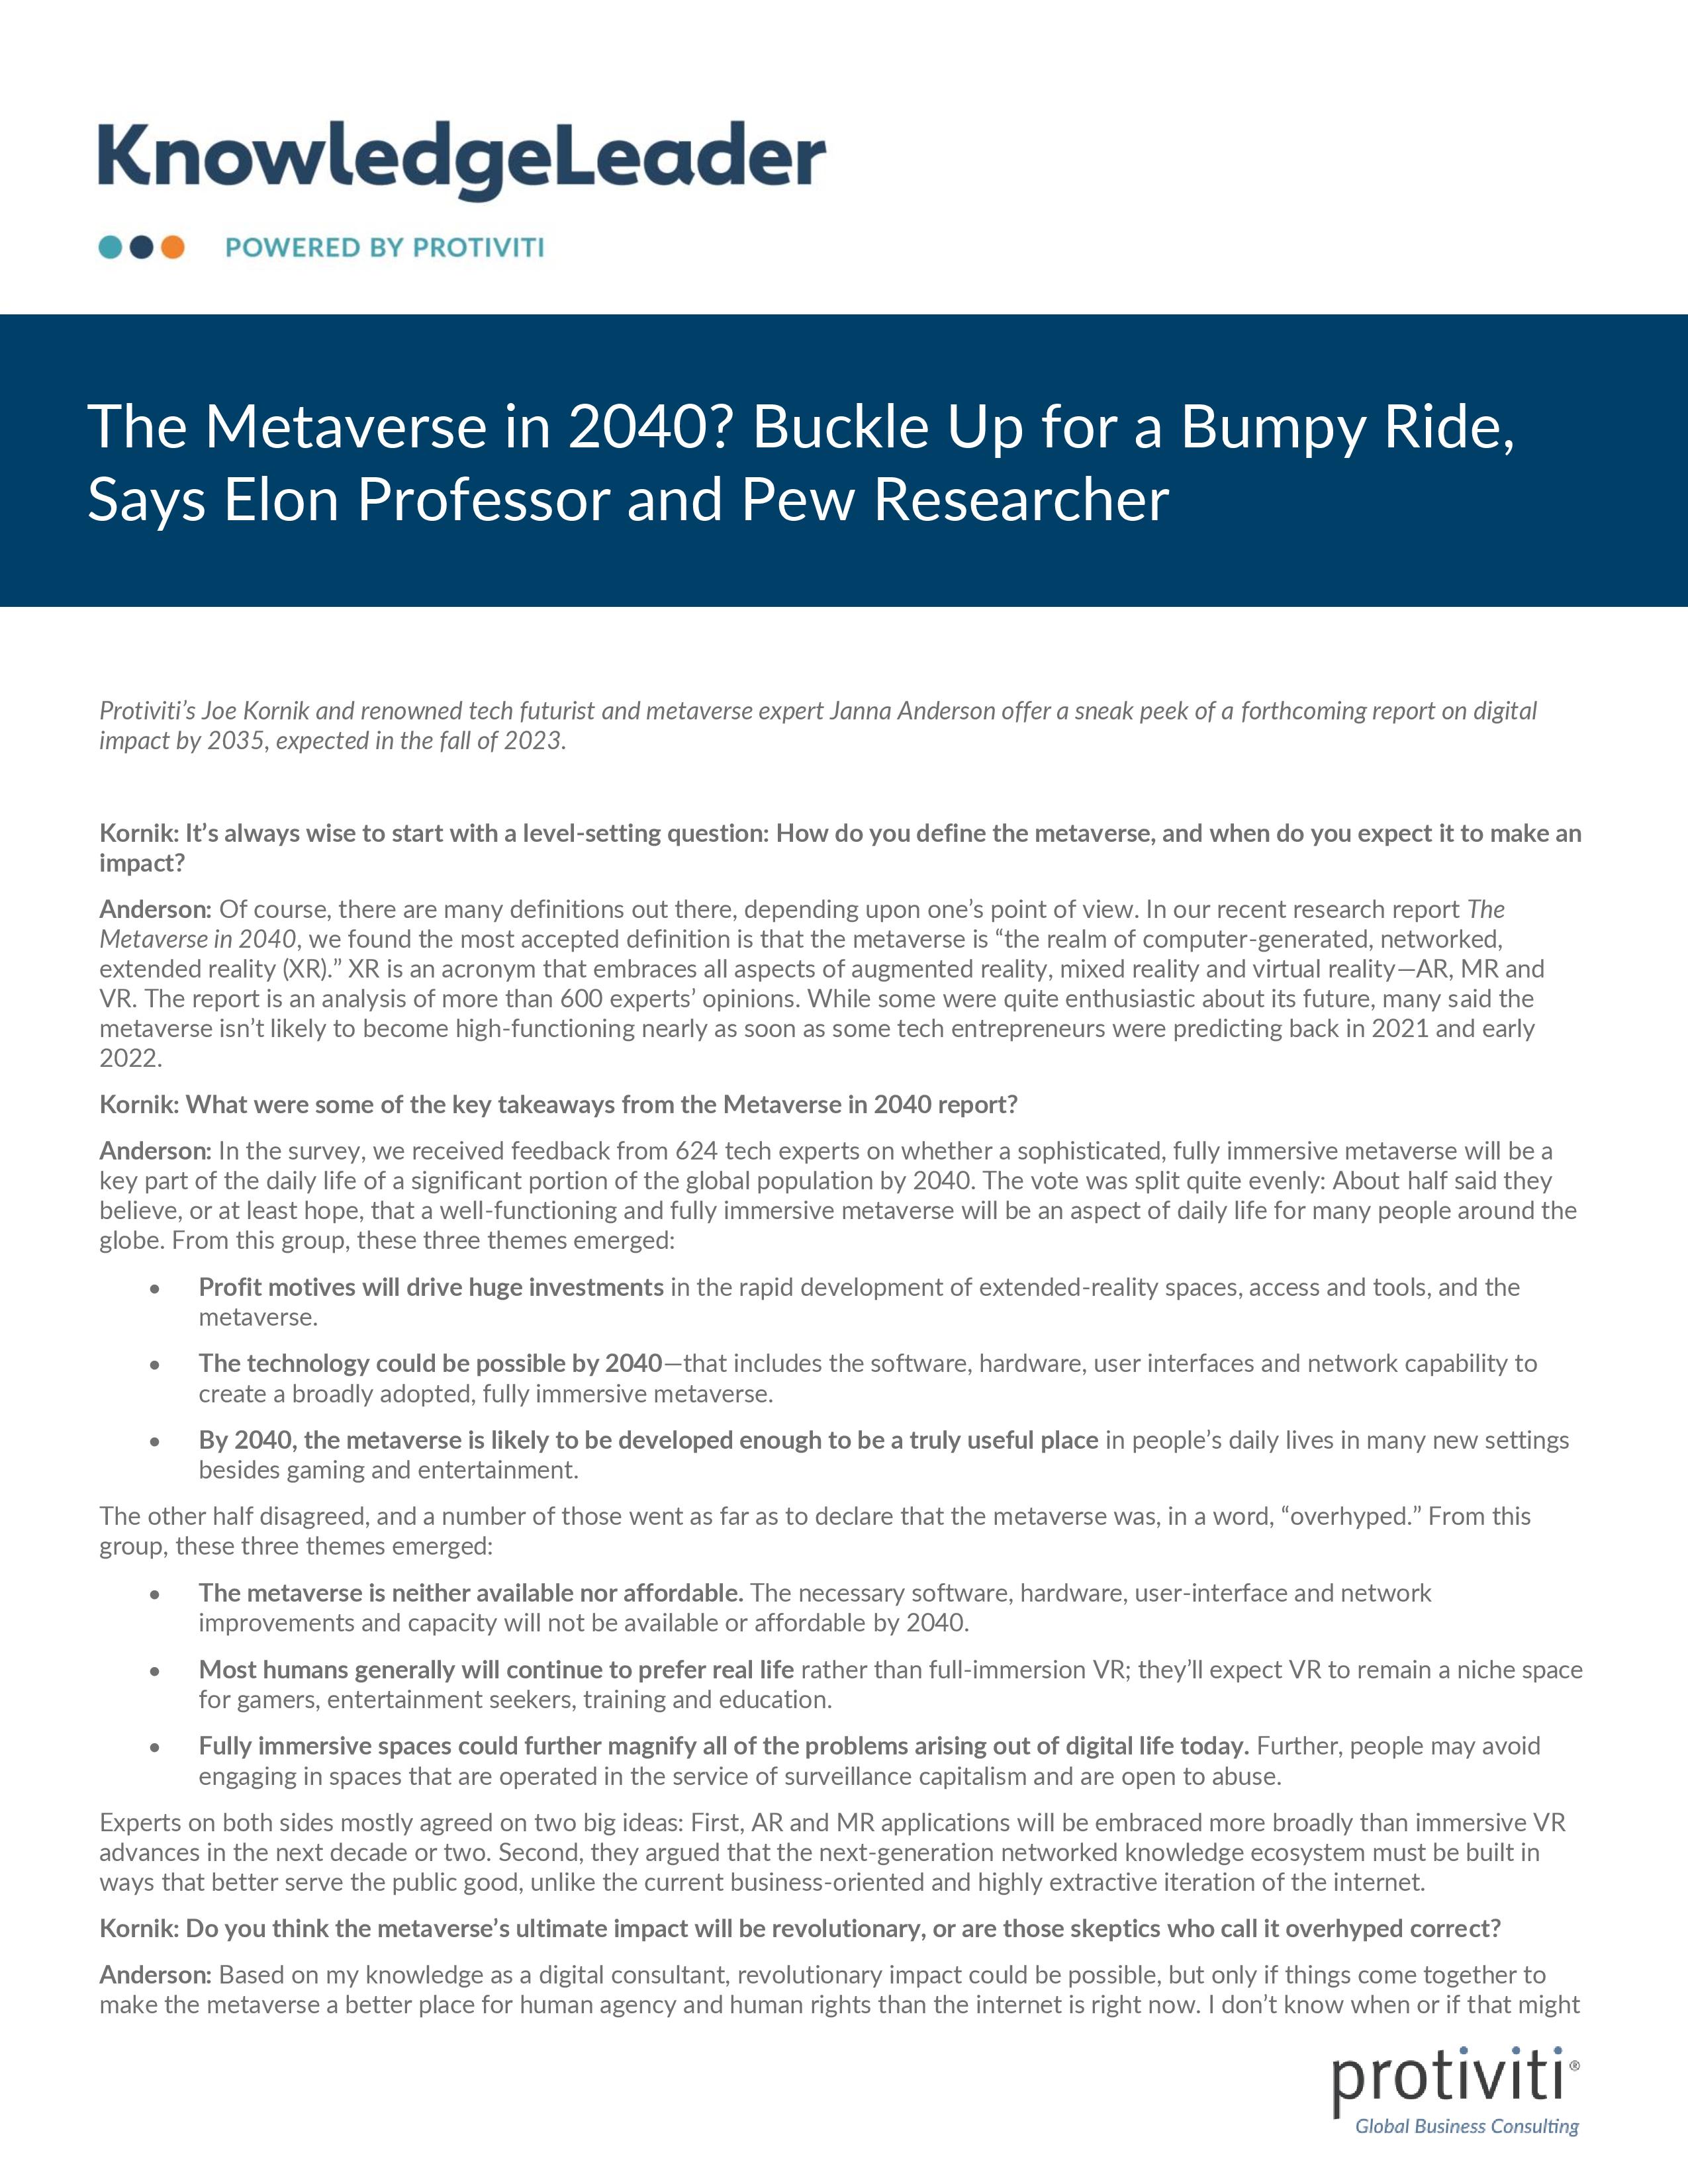 Screenshot of the first page of The Metaverse in 2040 Buckle Up for a Bumpy Ride, Says Elon Professor and Pew Researcher